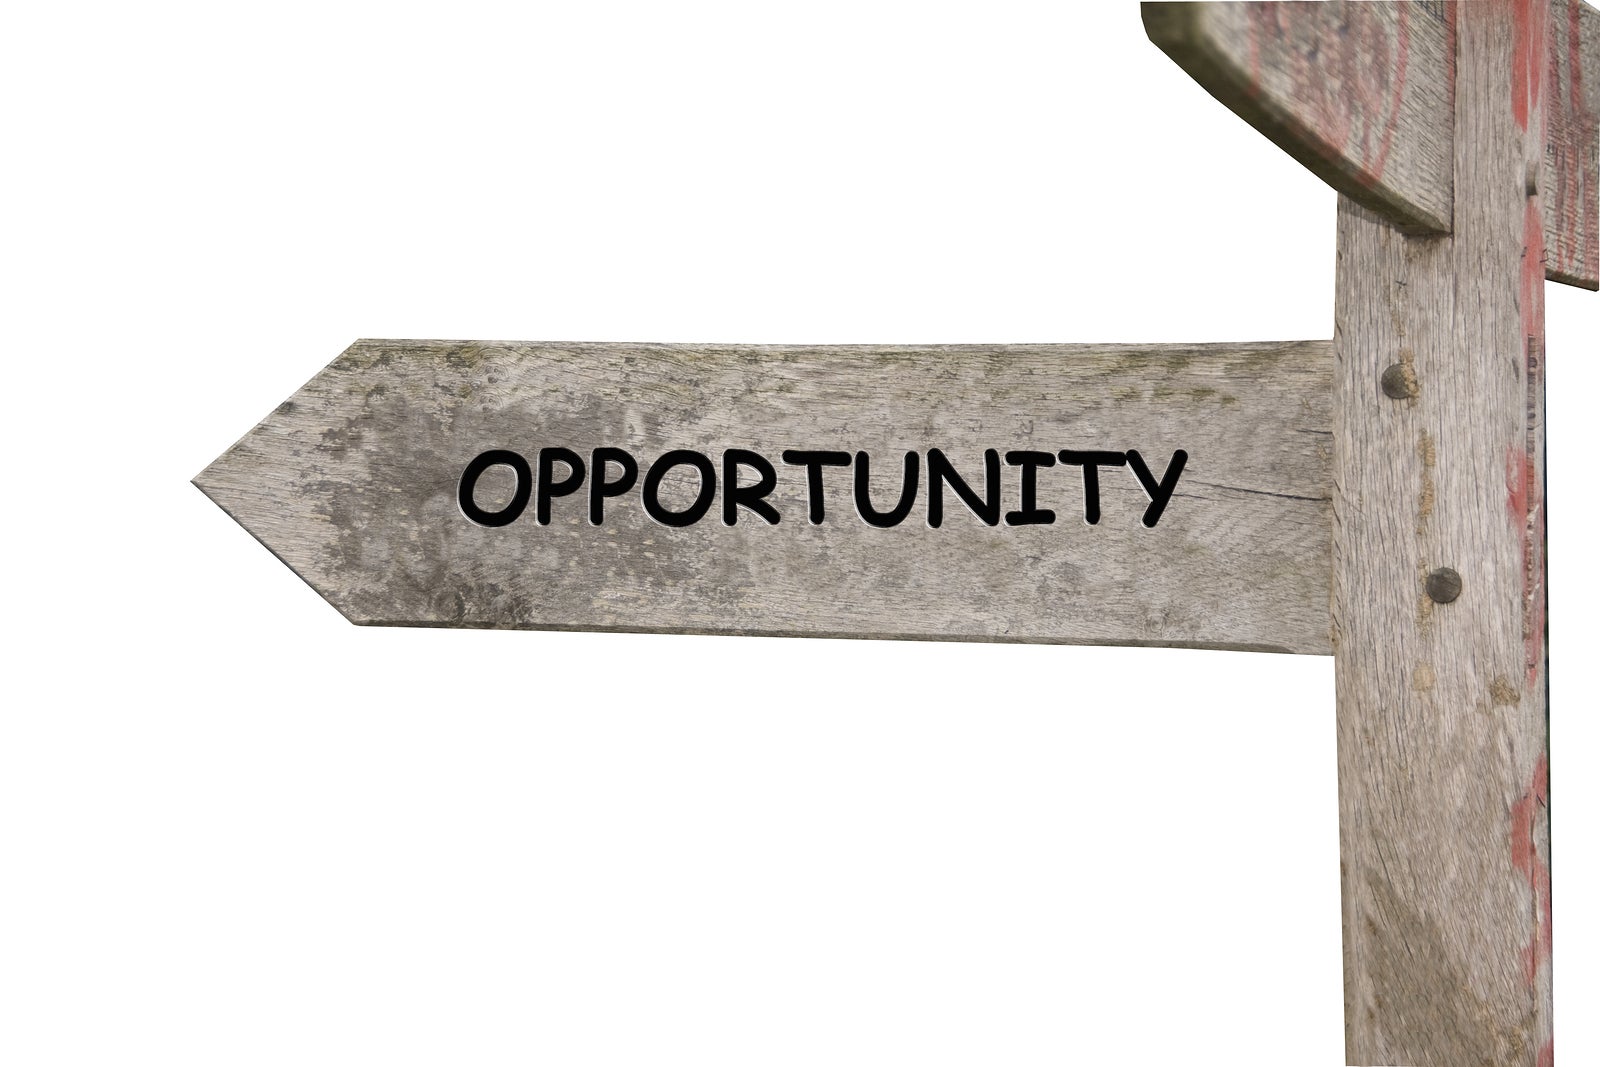 A sign that reads "Opportunity" on a wooden post with white background